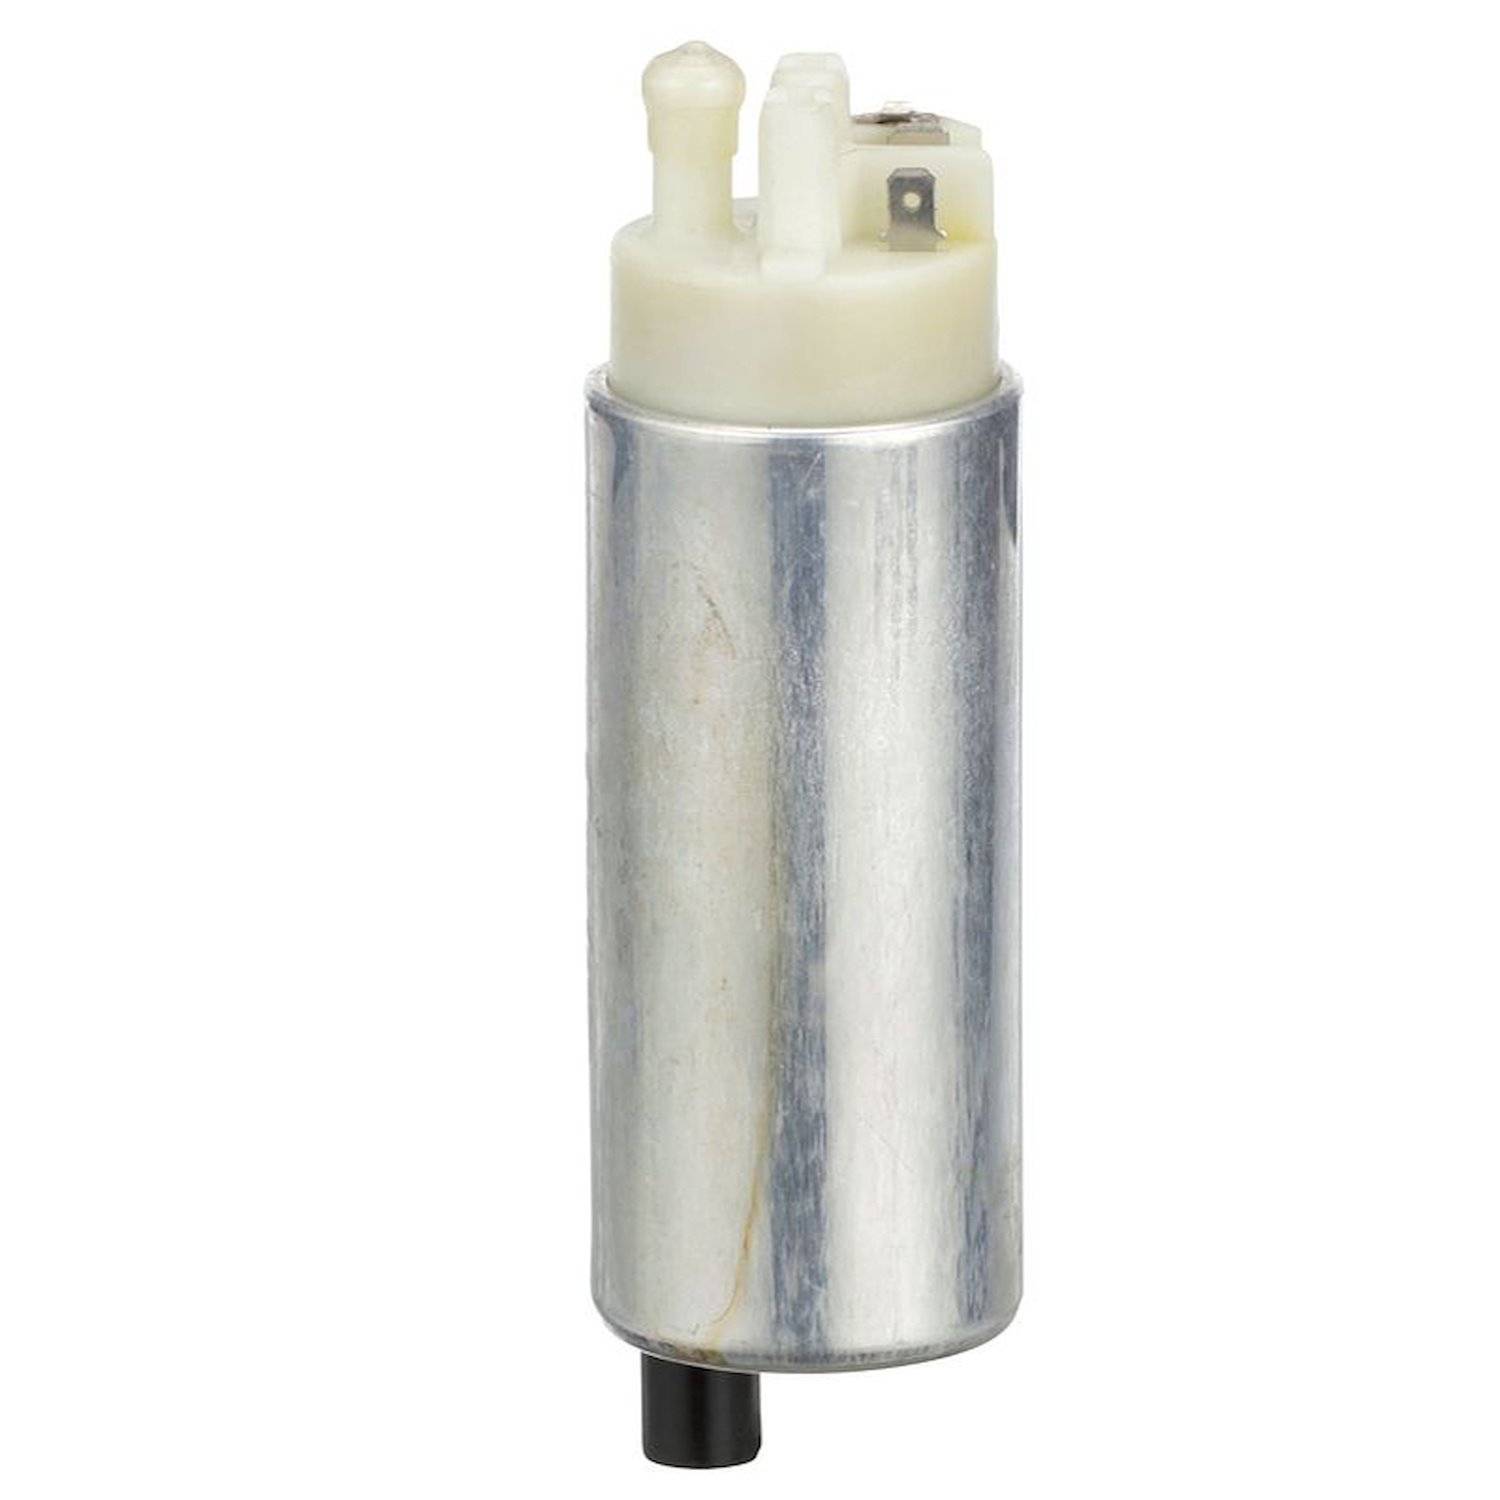 EFI In-Tank Electric Fuel Pump for 1988-1995 BMW